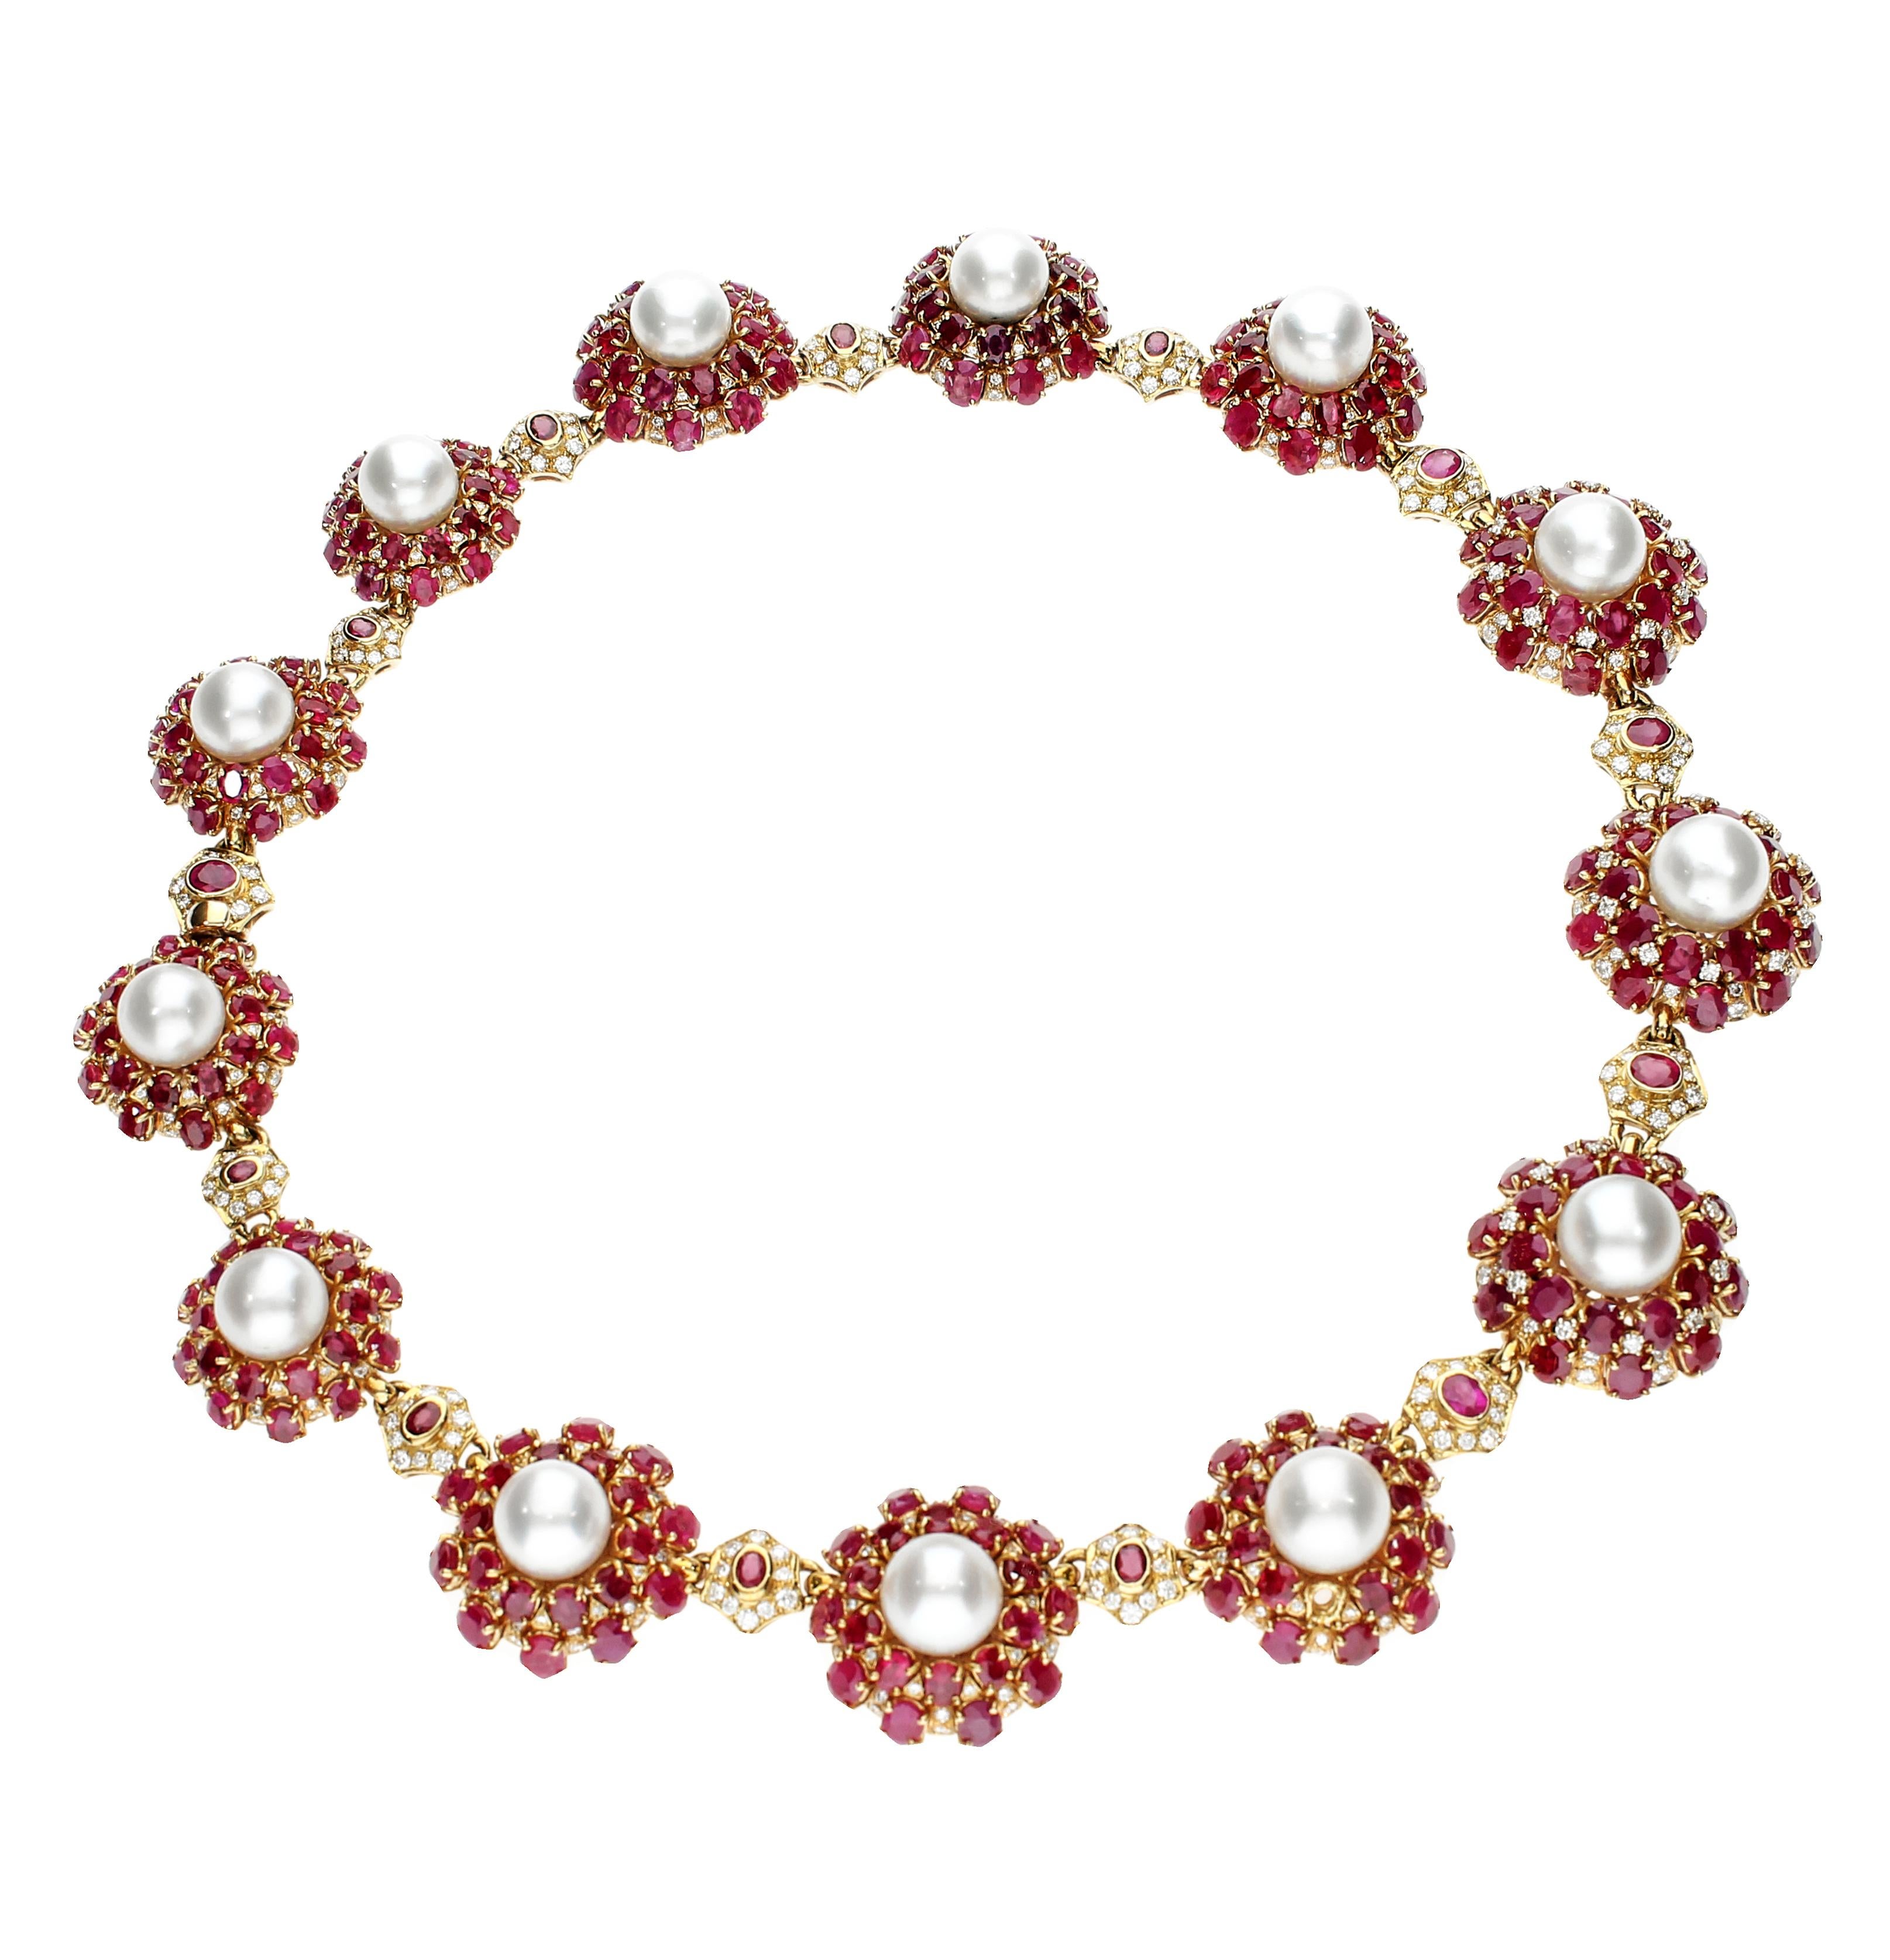 Retro Necklace with Rubies, Pearls and Diamonds in 18 Karat Yellow Gold